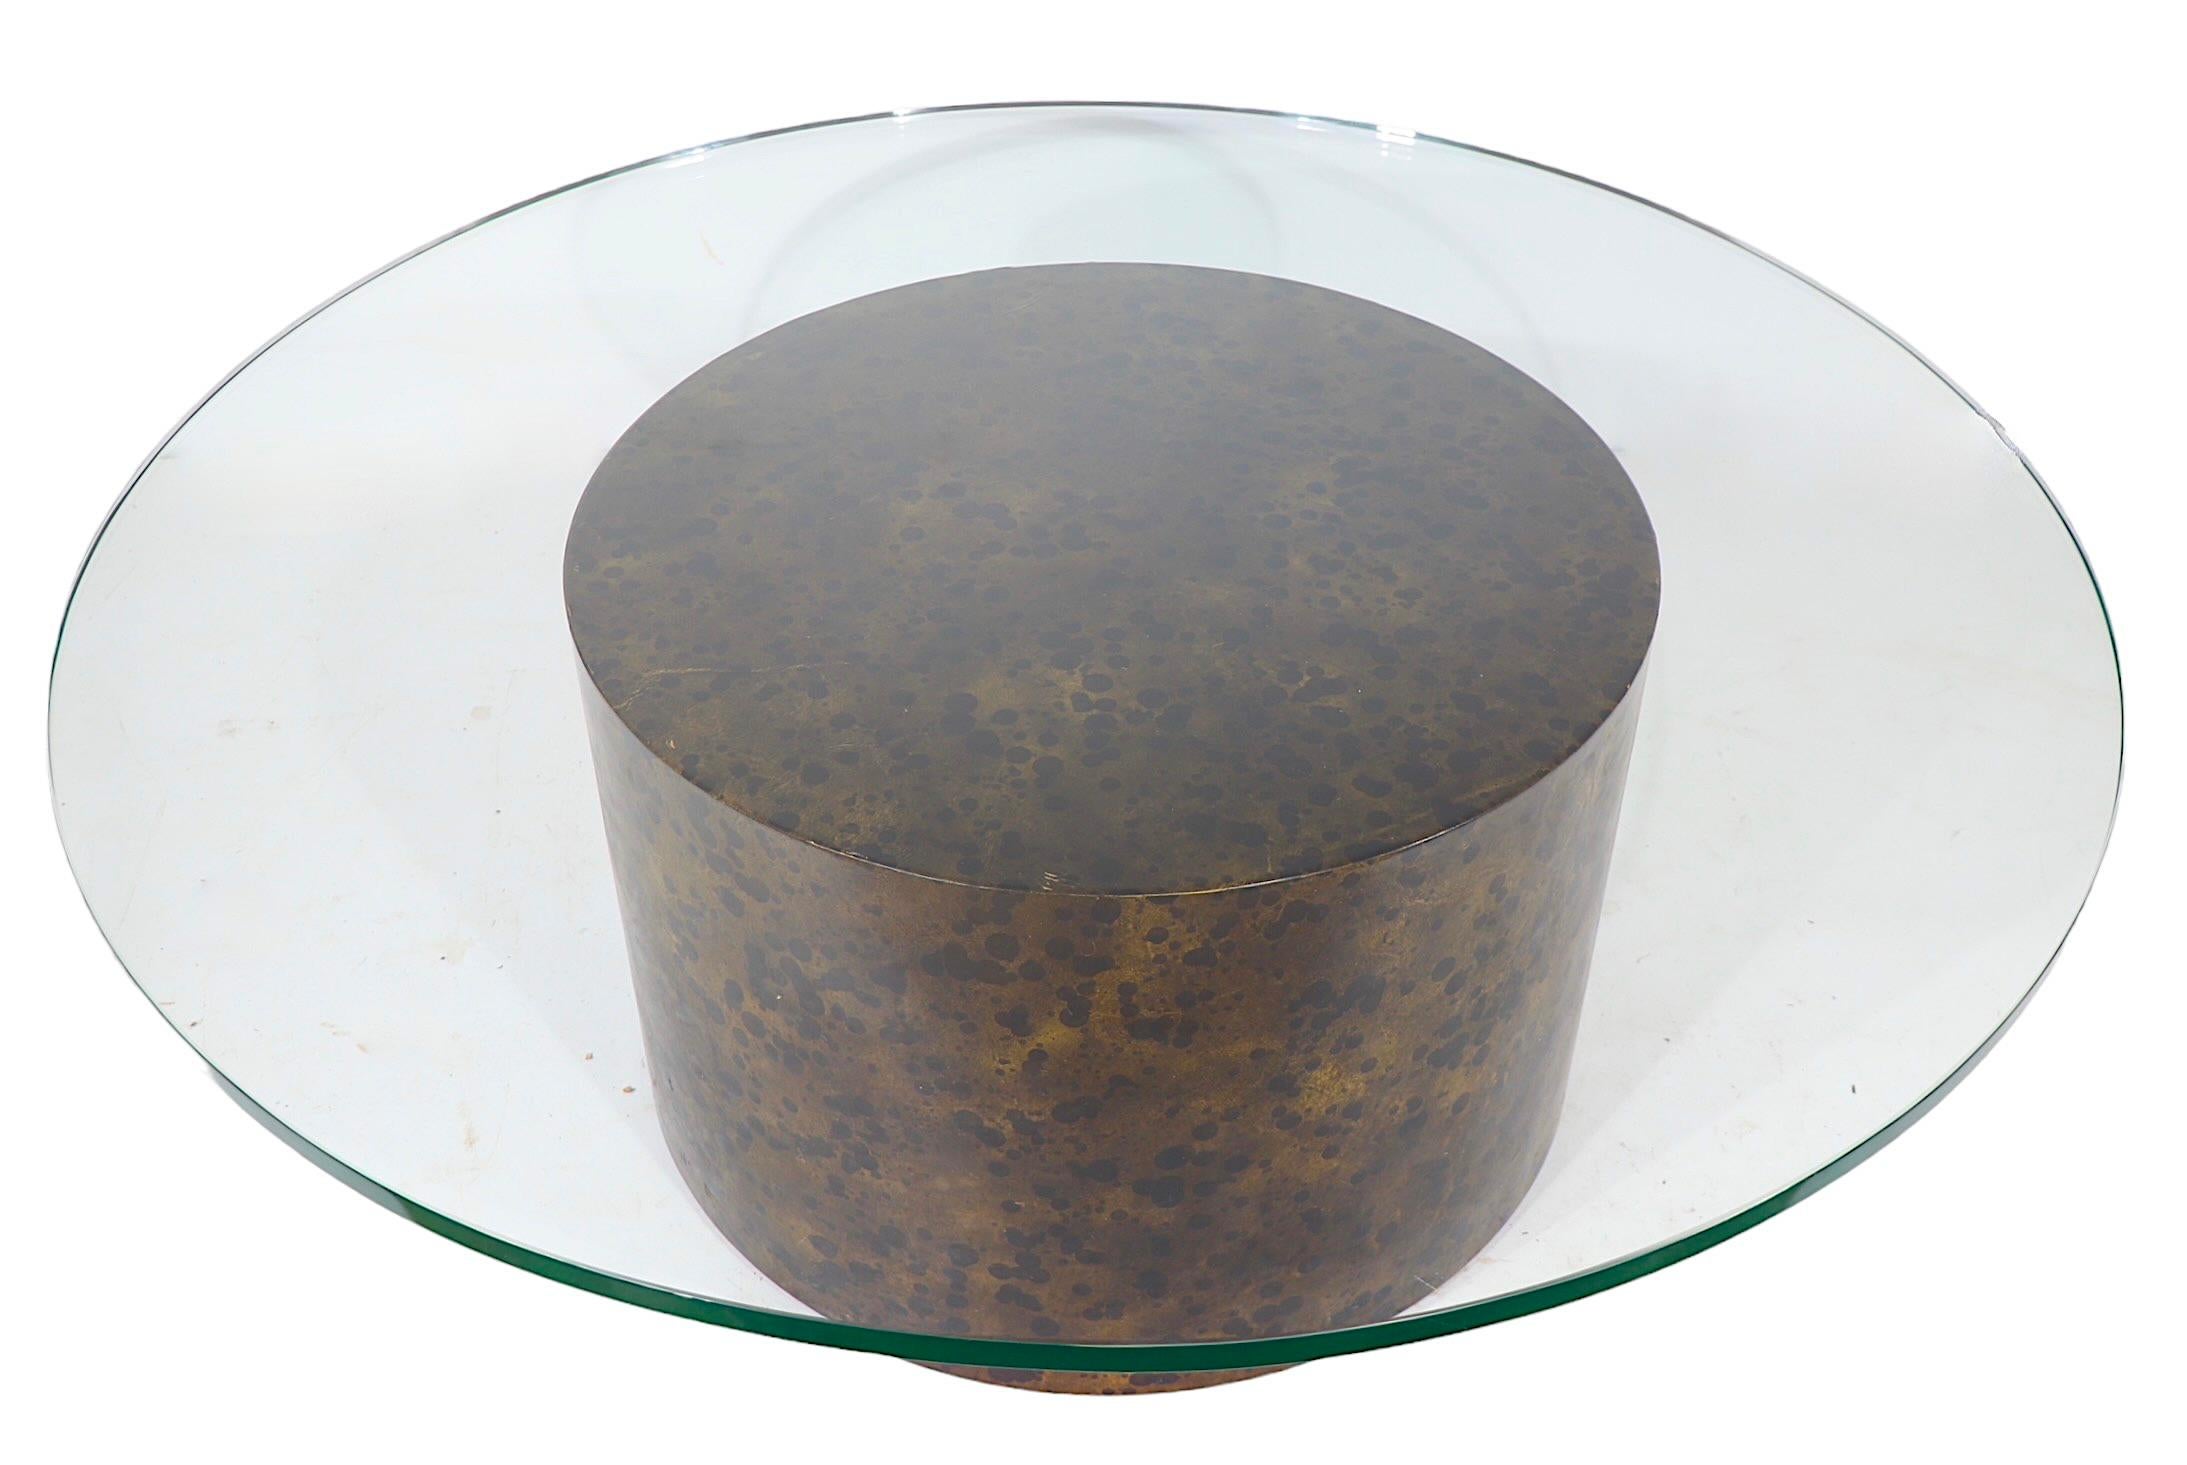 Voguish, chic and sophisticated coffee table having a faux metal finish pedestal base composed of parchment paper over wood, which supports the original thick ( .75 in. ) round glass top. The table is reminiscent of the work of Aldo Tura, this